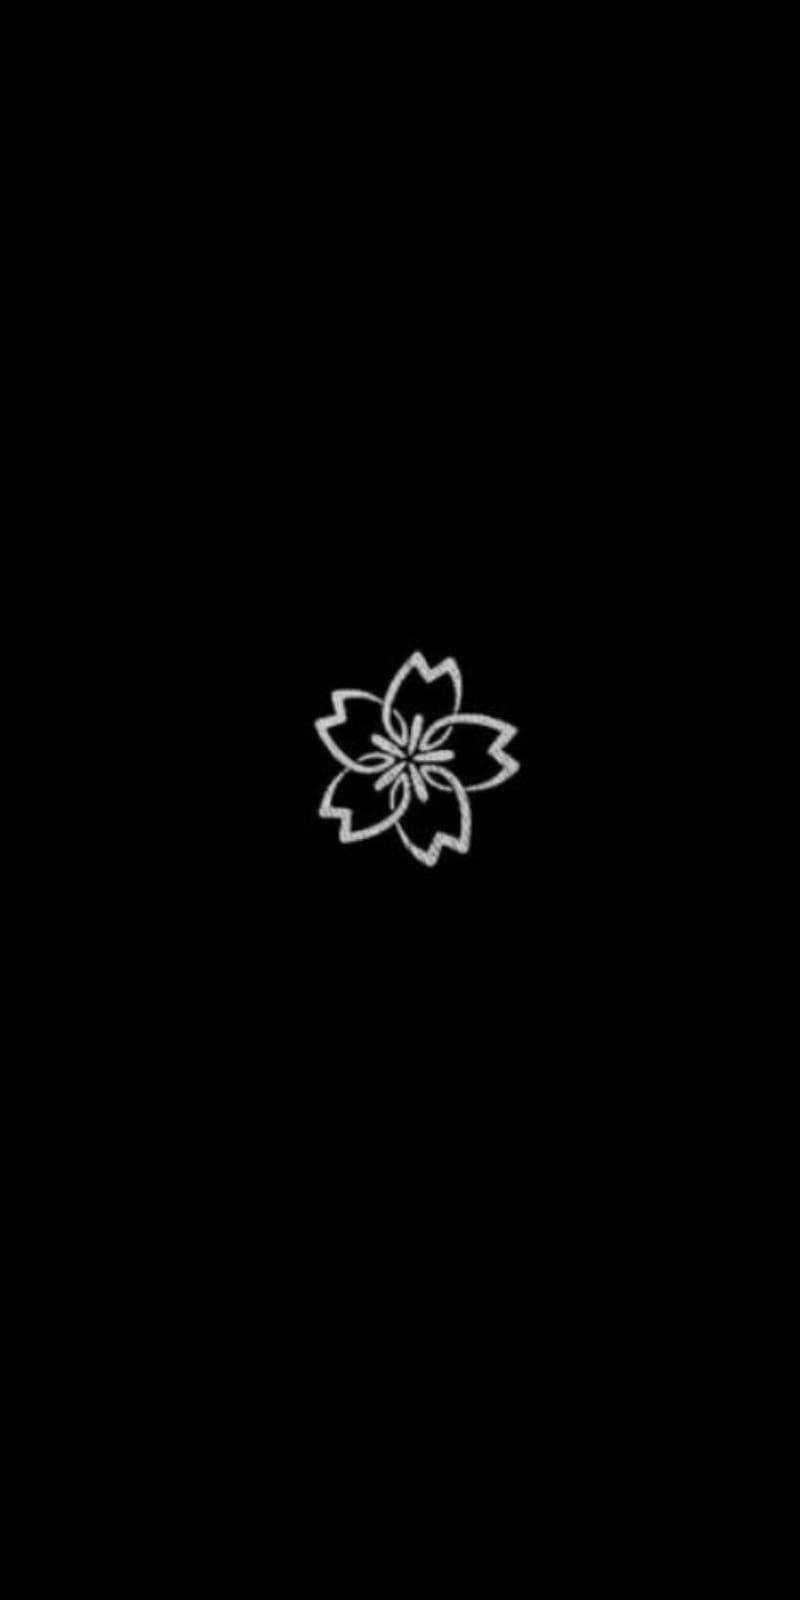 Black background with a white outline of a flower - Black and white